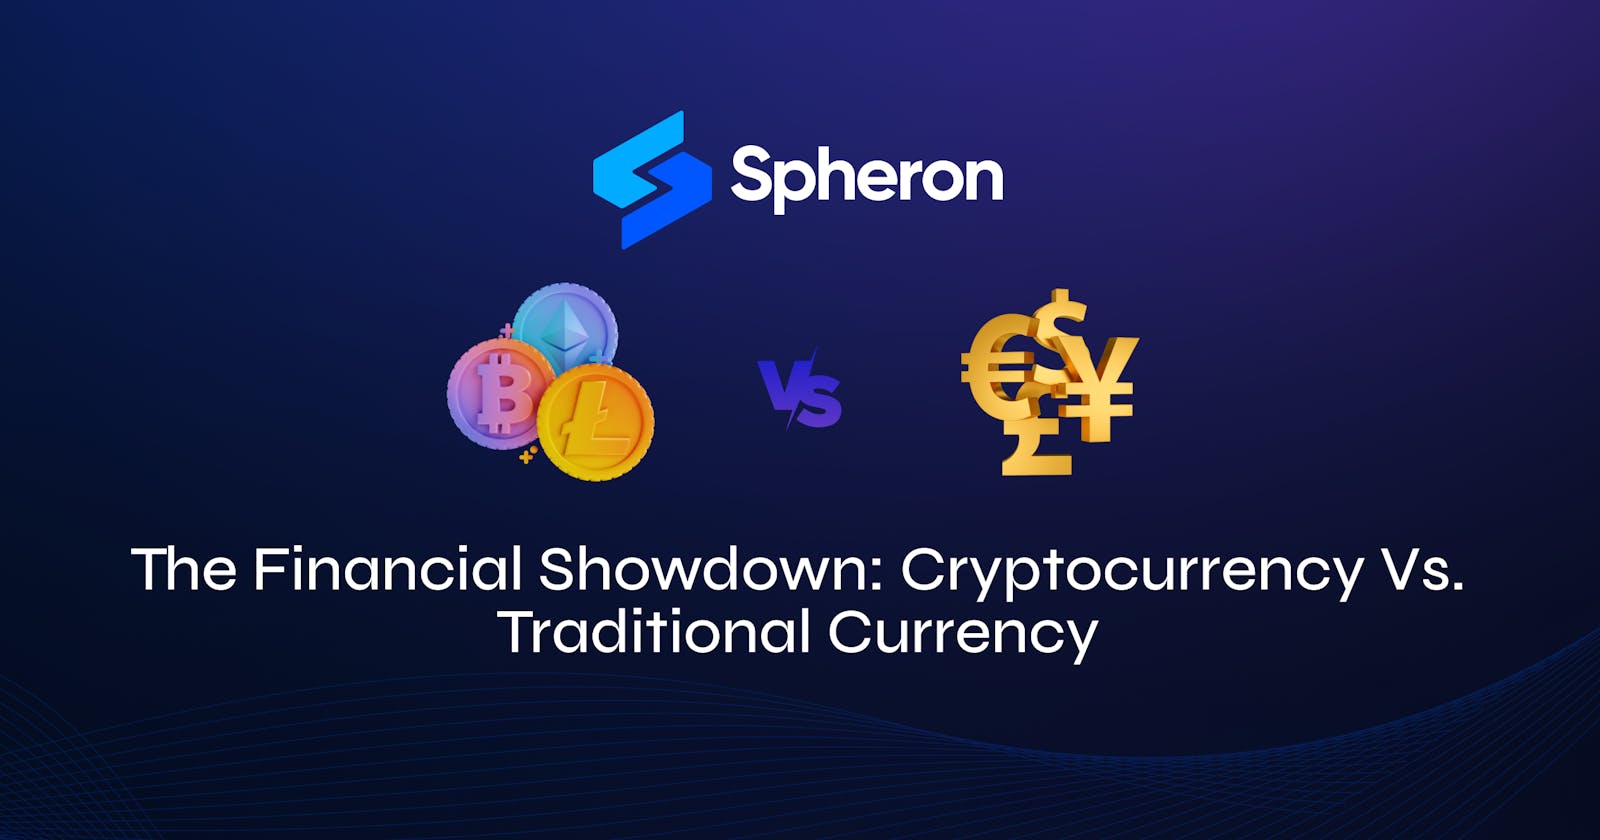 The Financial Showdown: Cryptocurrency Vs. Traditional Currency